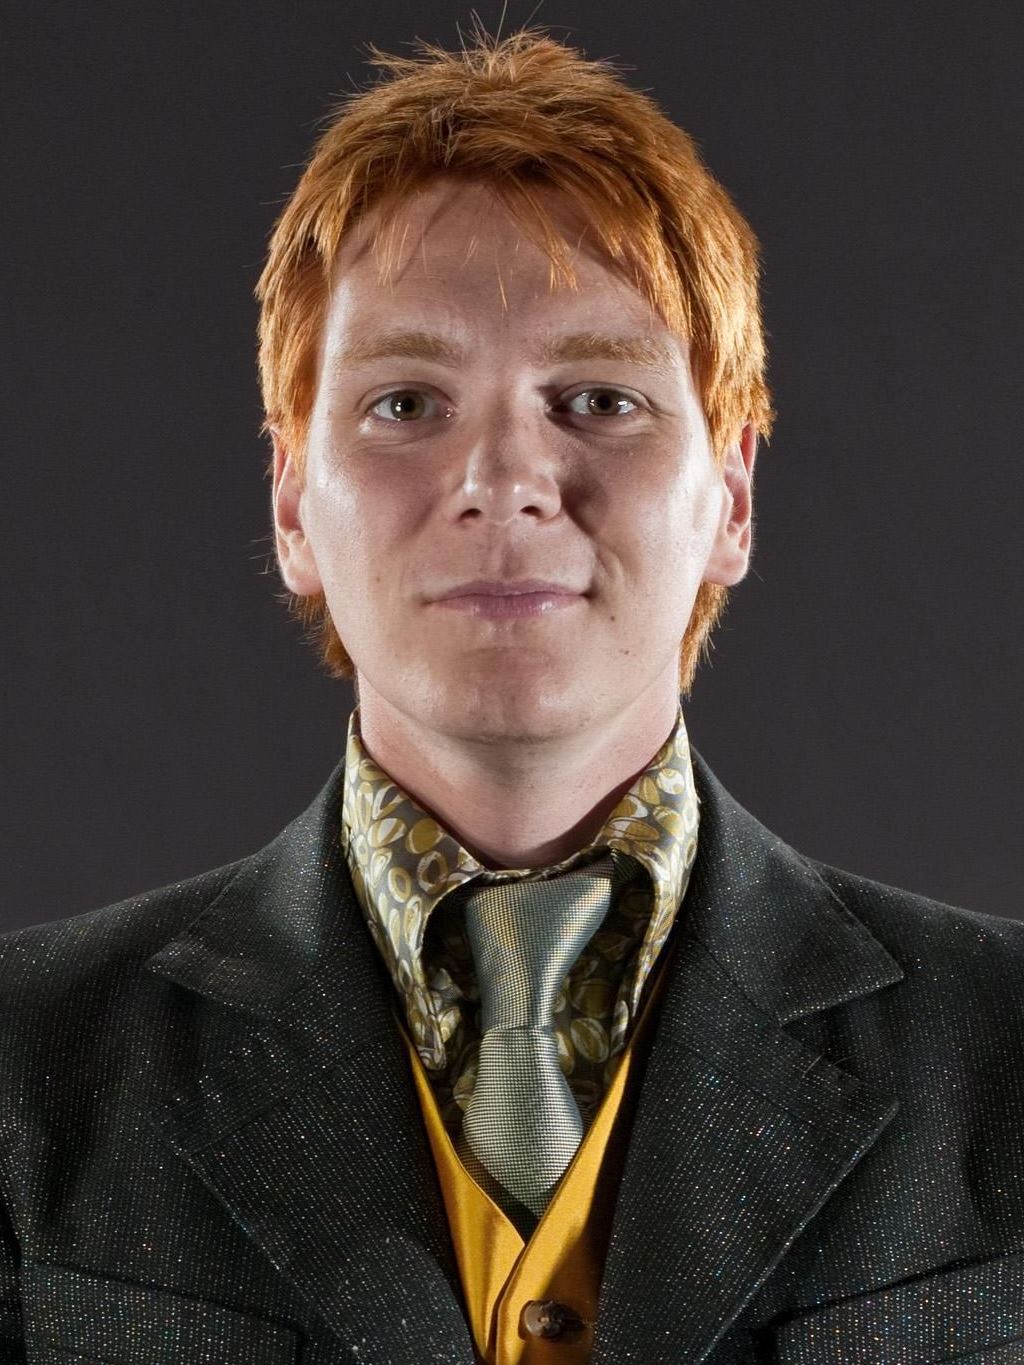 Who Played Fred Weasley In The Harry Potter Franchise?